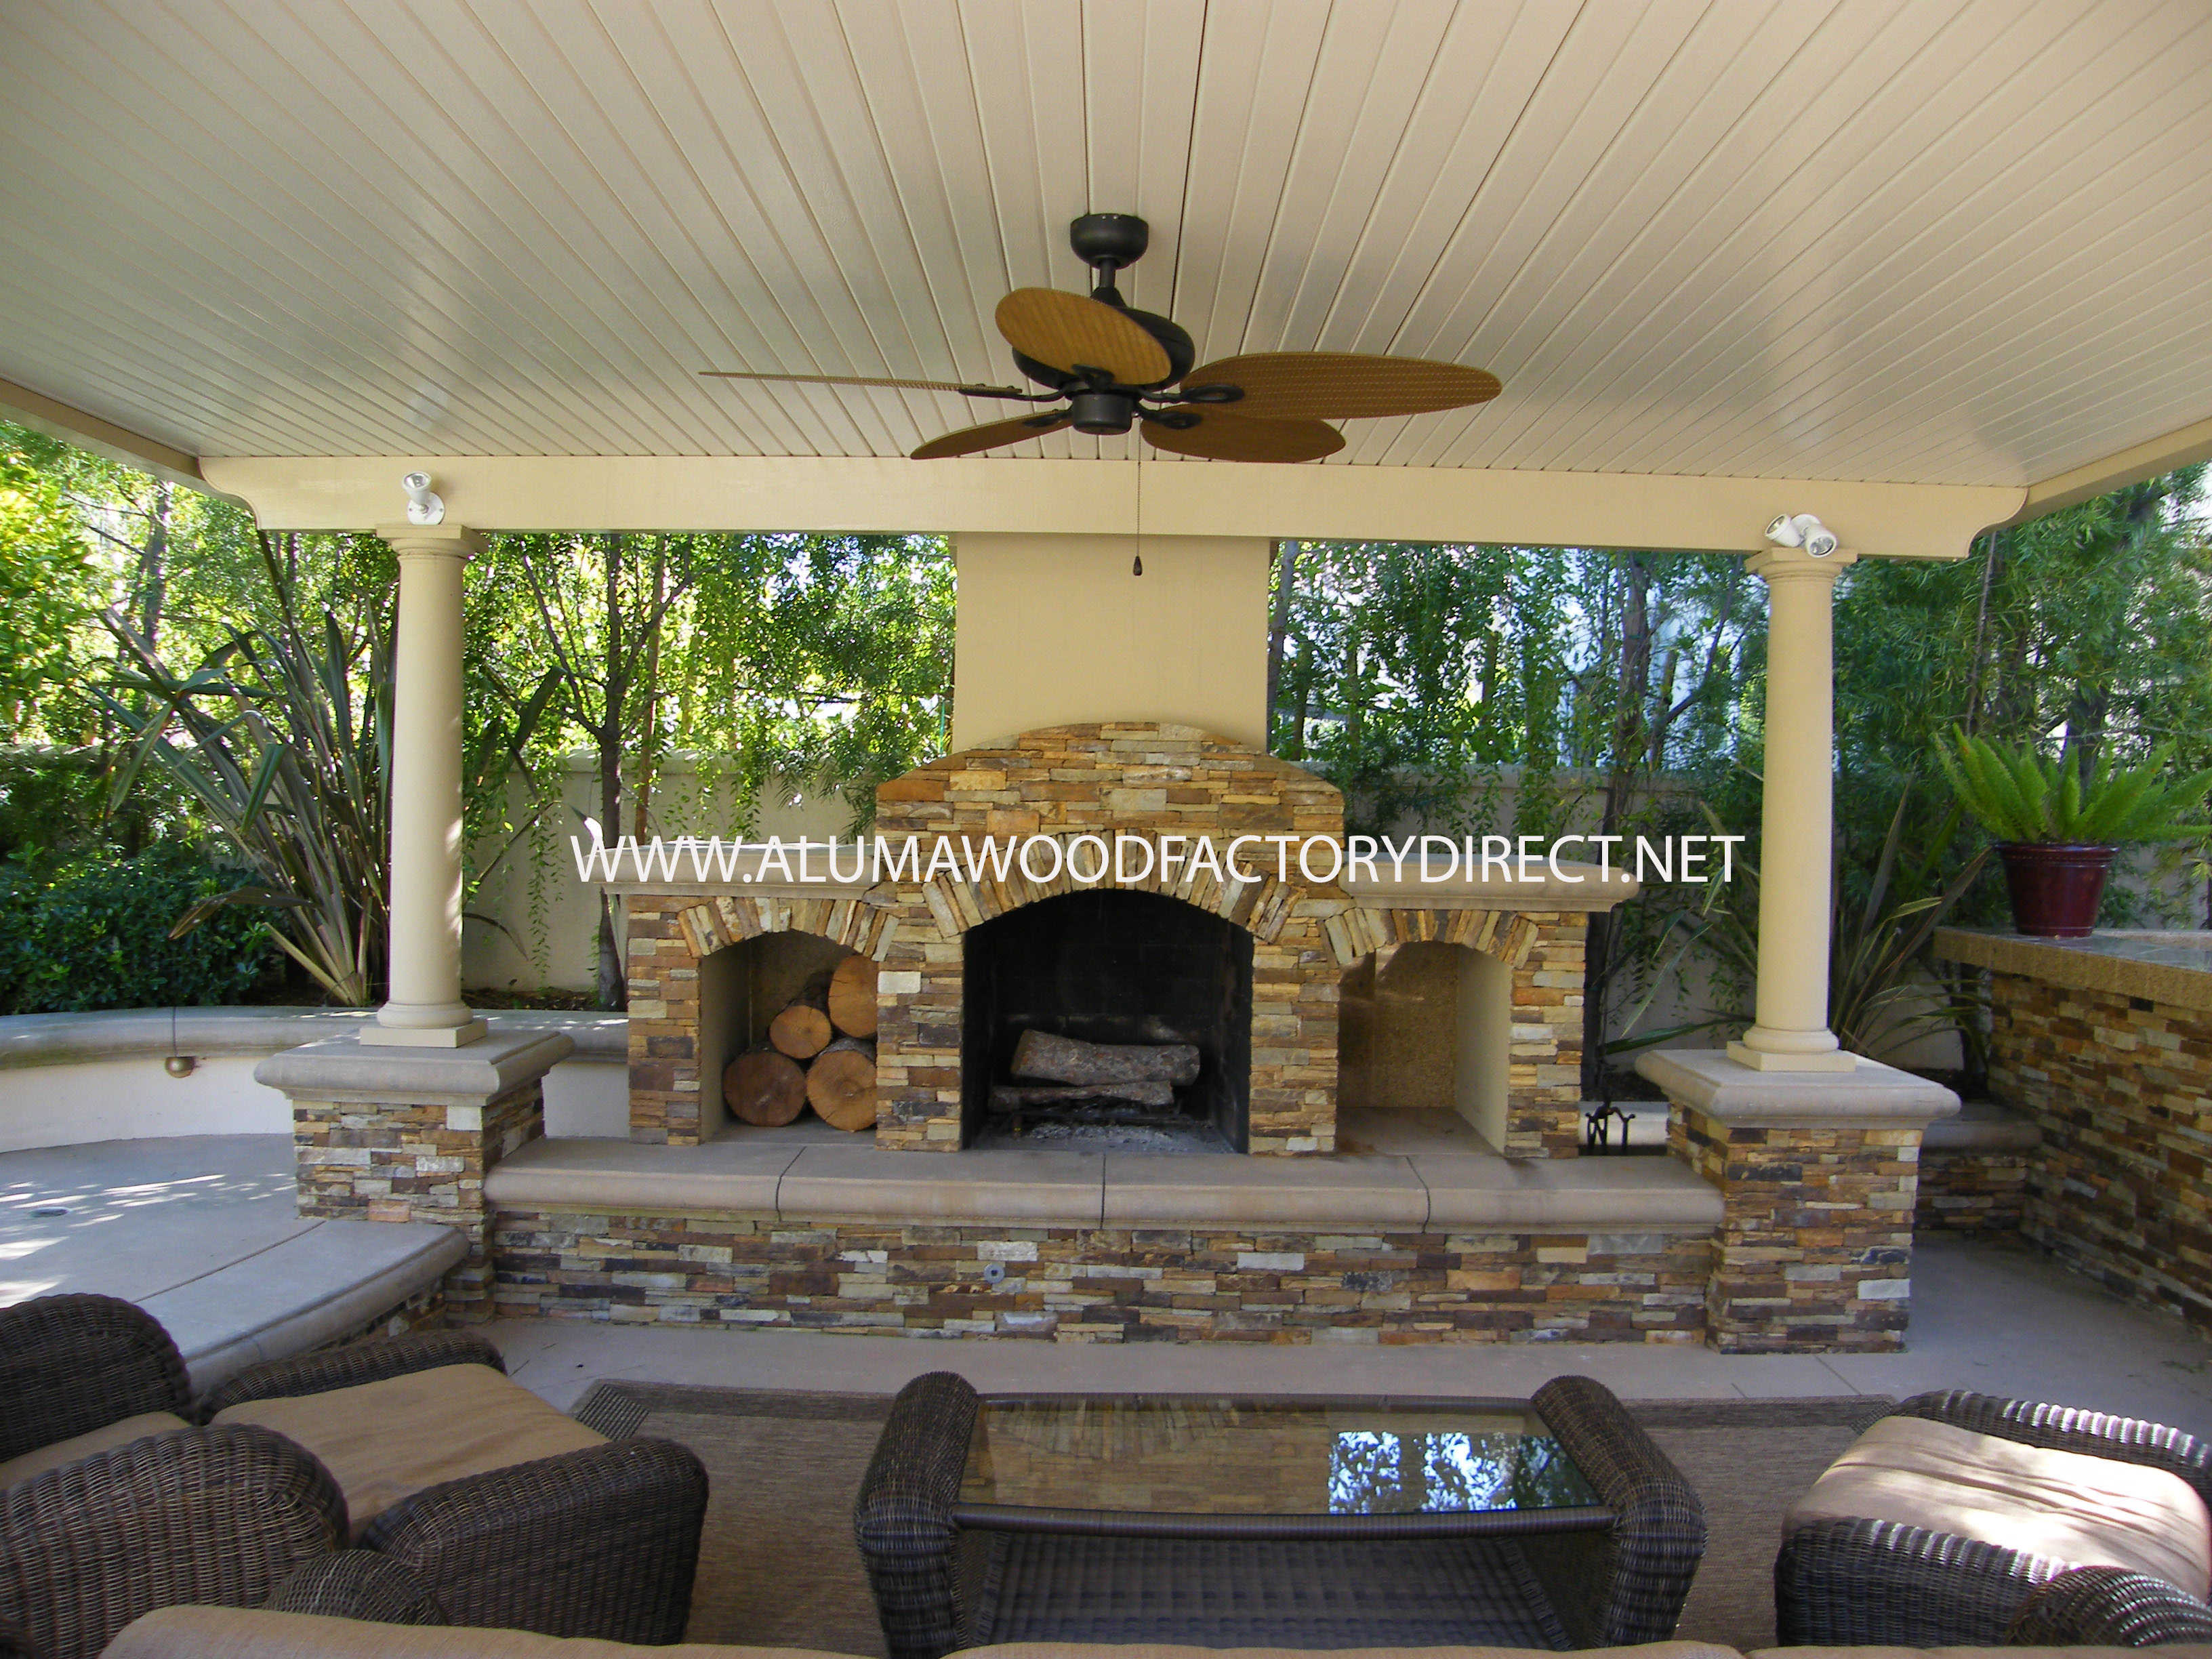 Patio Cover Cost 10 X 20 3 300 Complete Premium Quality Alumawood Factory Direct Covers - How Much Is Aluminum Patio Cover